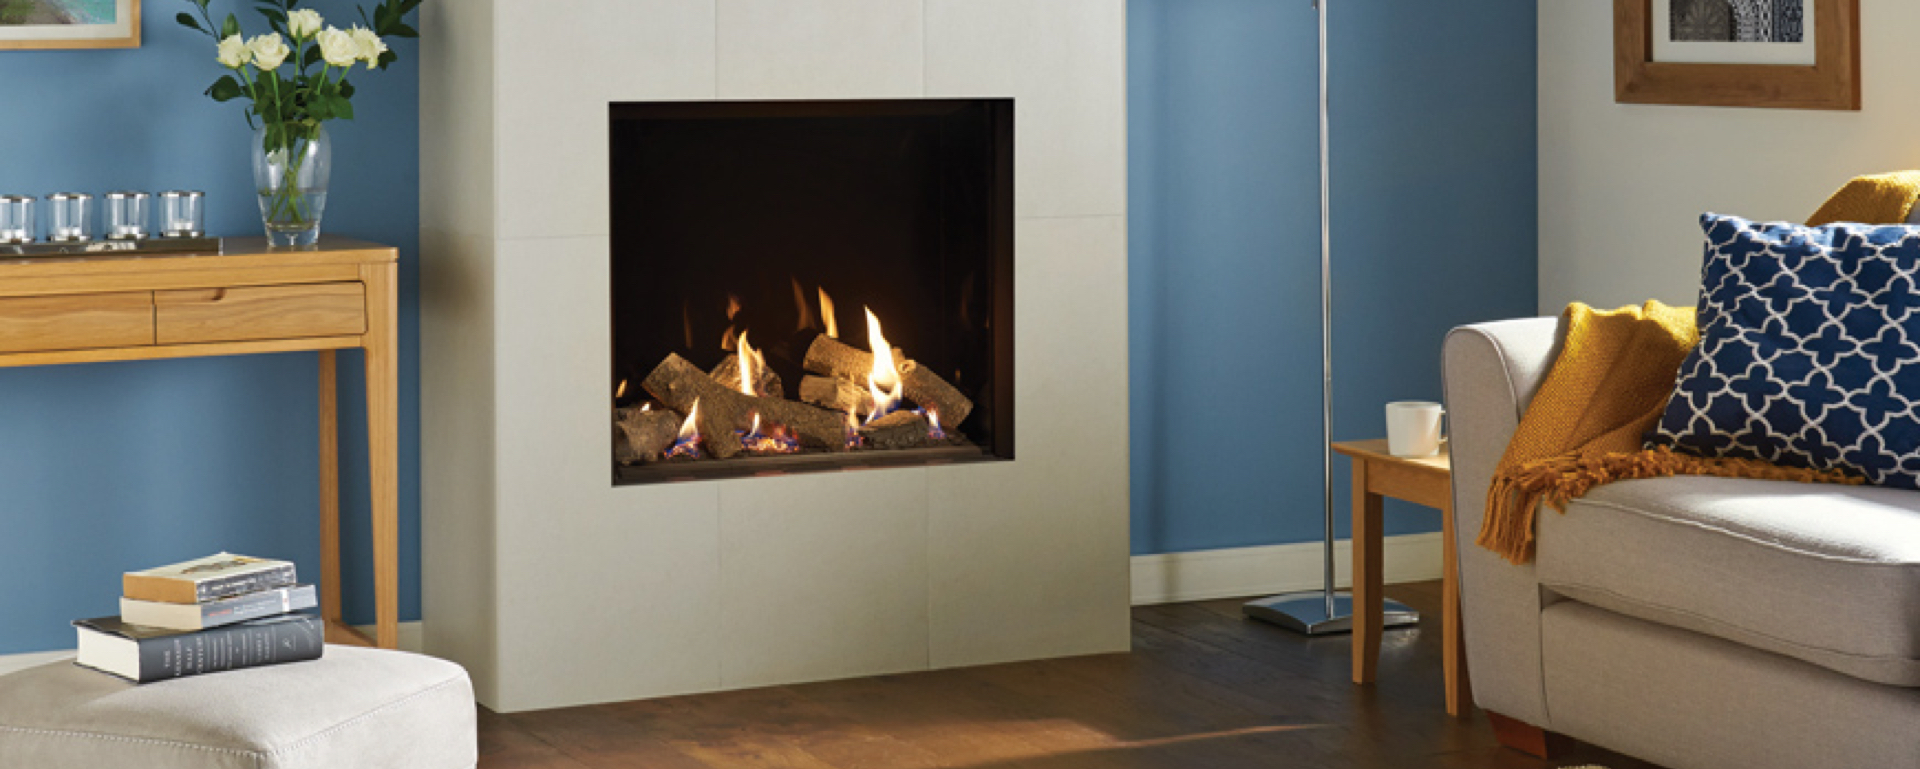 Gazco Riva2 750HL Hole in the Wall Gas Fire